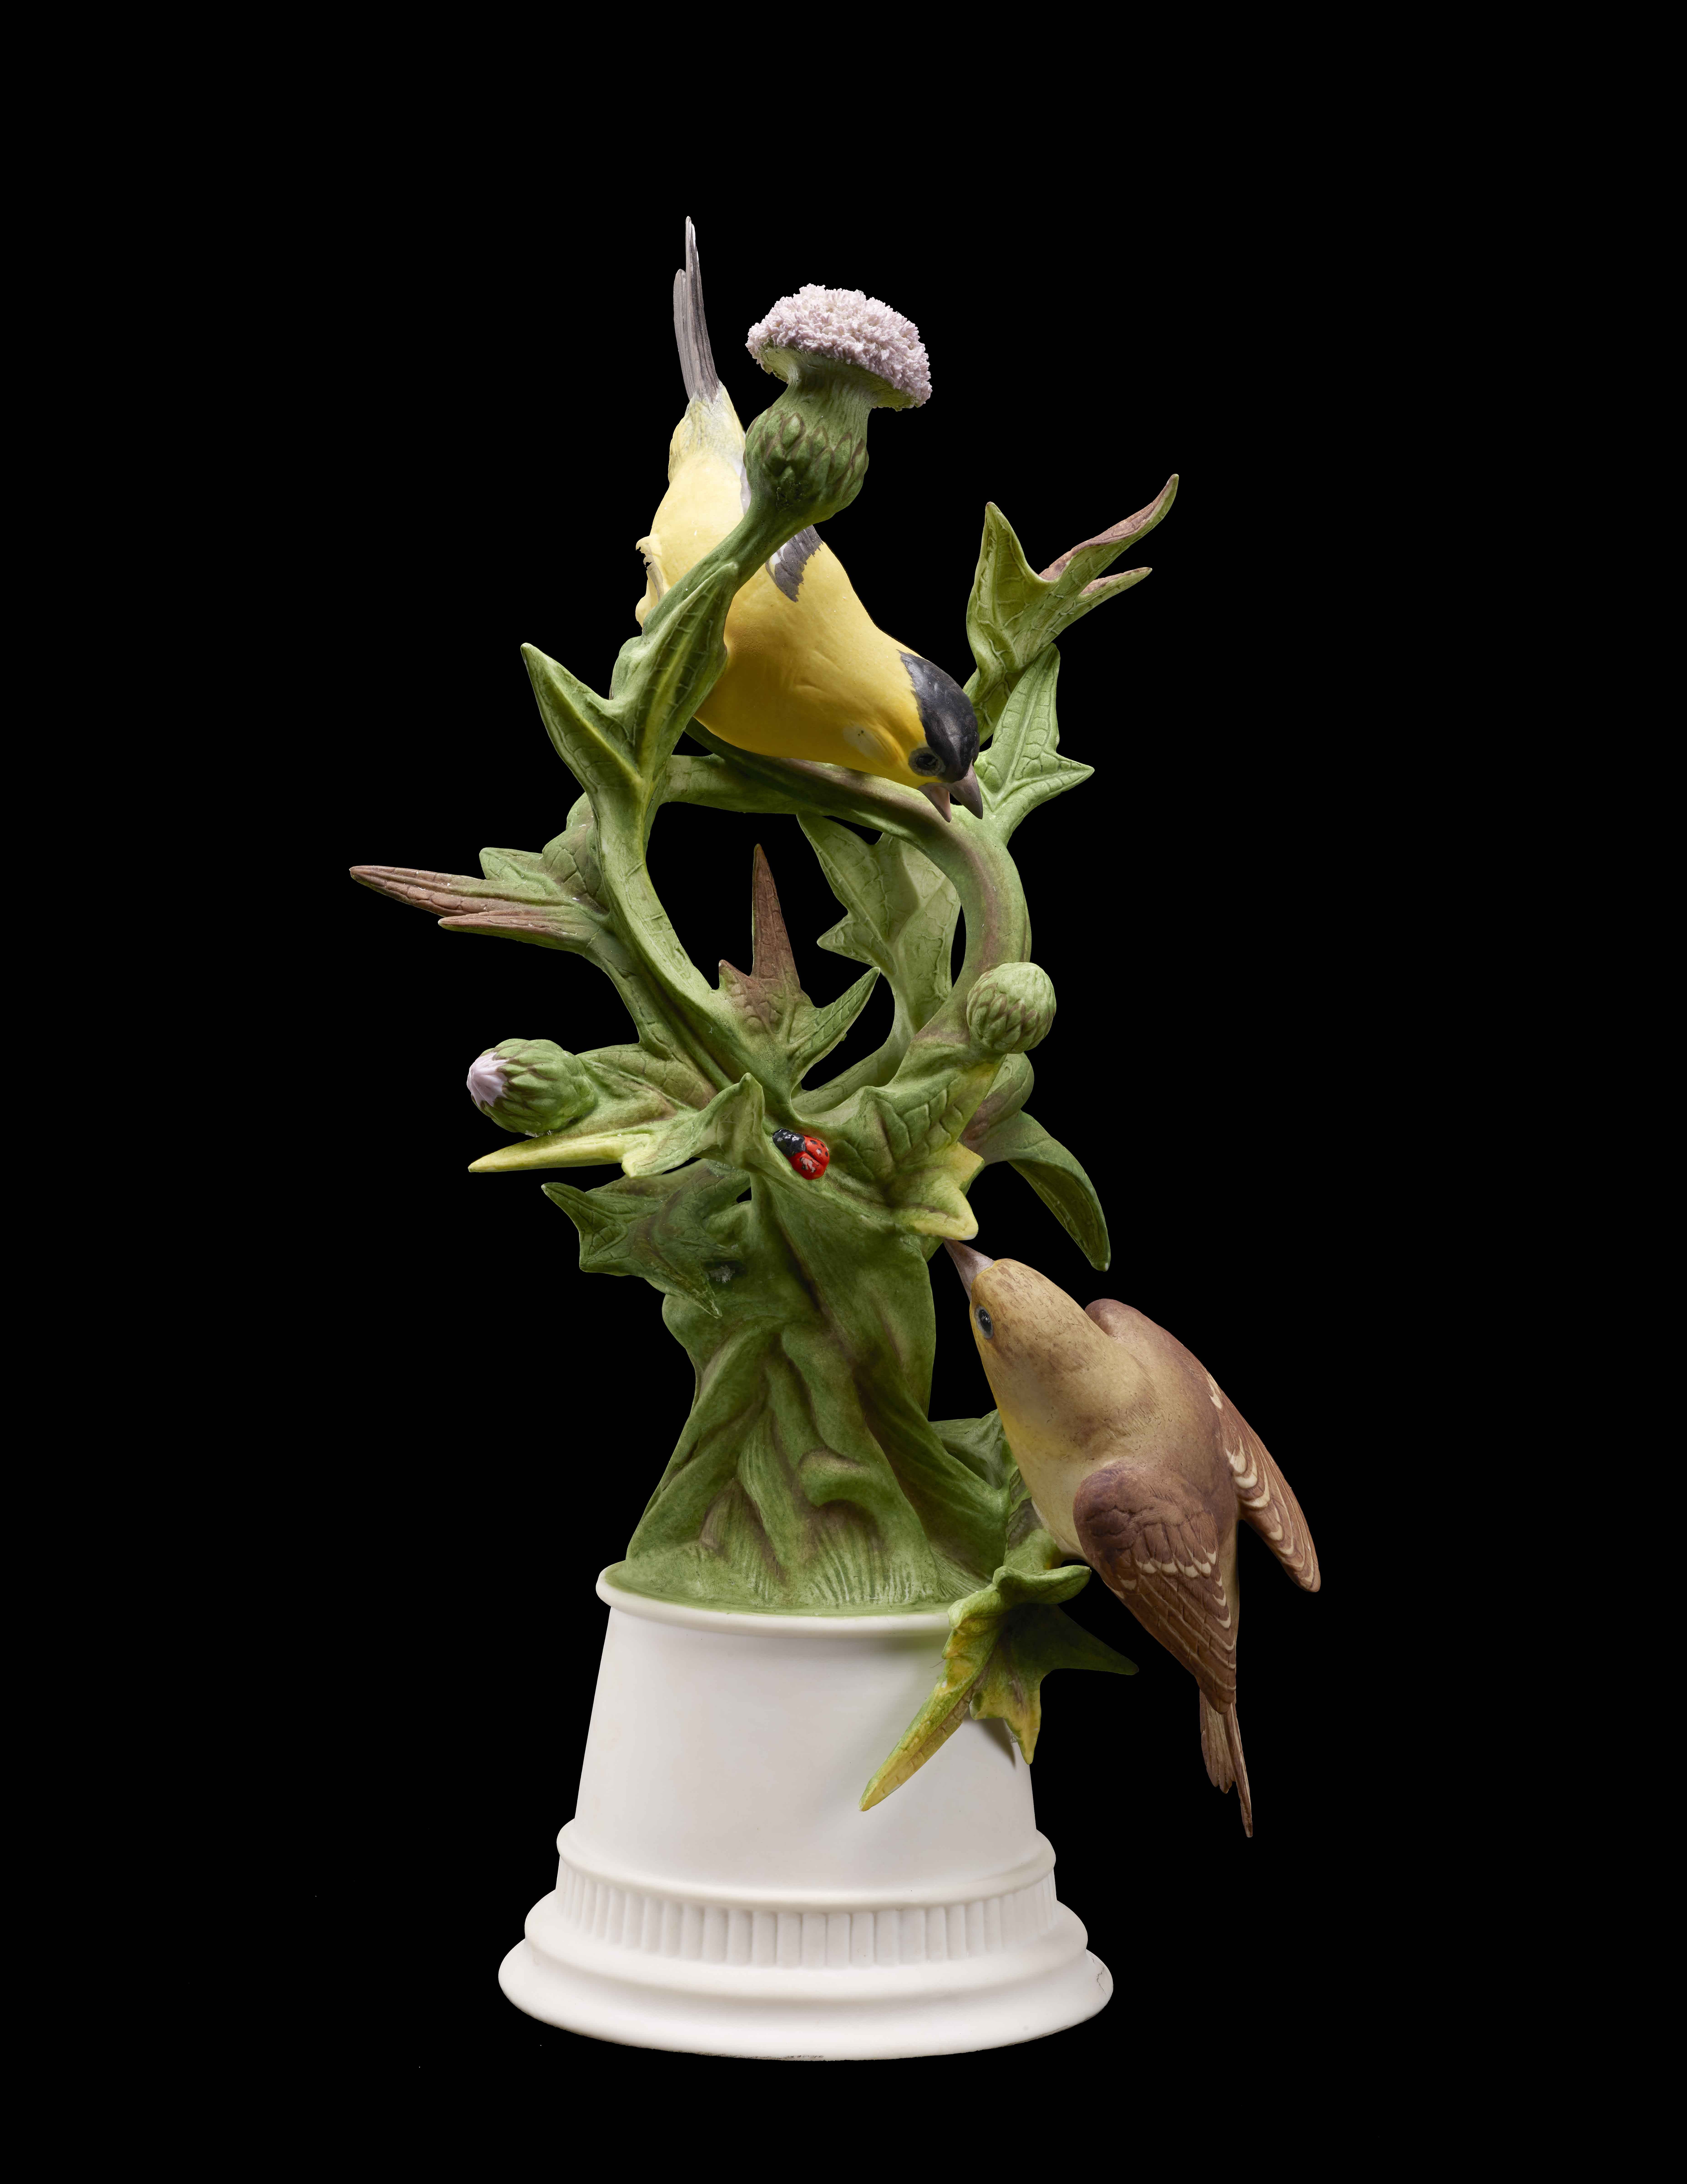 Porcelain sculpture of birds in a green thistle